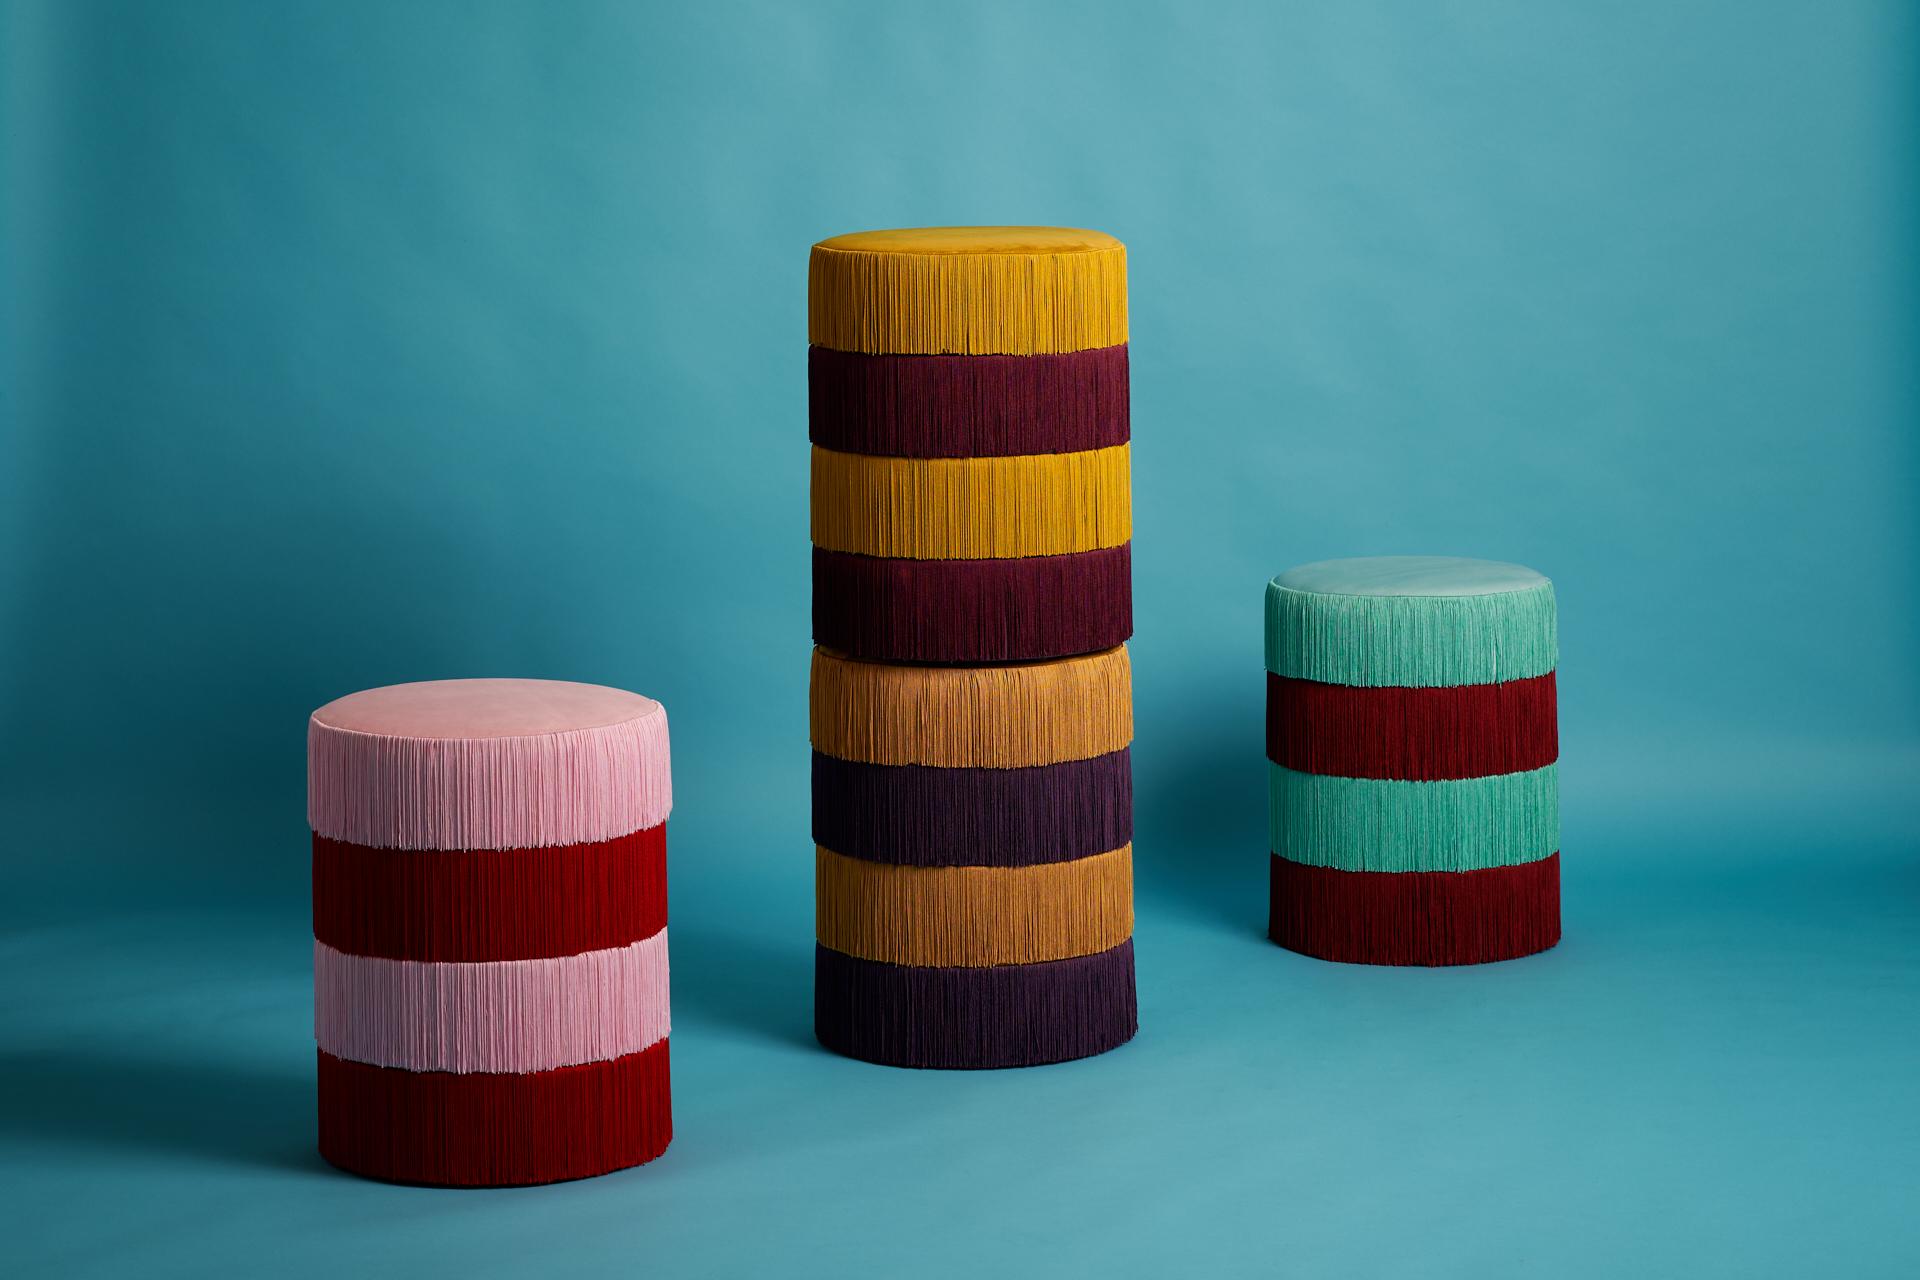 Chachachá pouf by Houtique
Dimensions: H 45 x D 35 cm
Materials: Velvet upholstery, Wood

Art Deco style pouf with wood structure and velvet fabric. 4 modules connected by wooden sleepers, each one Formed by 2 fiber-board discs of 16mm, joined by